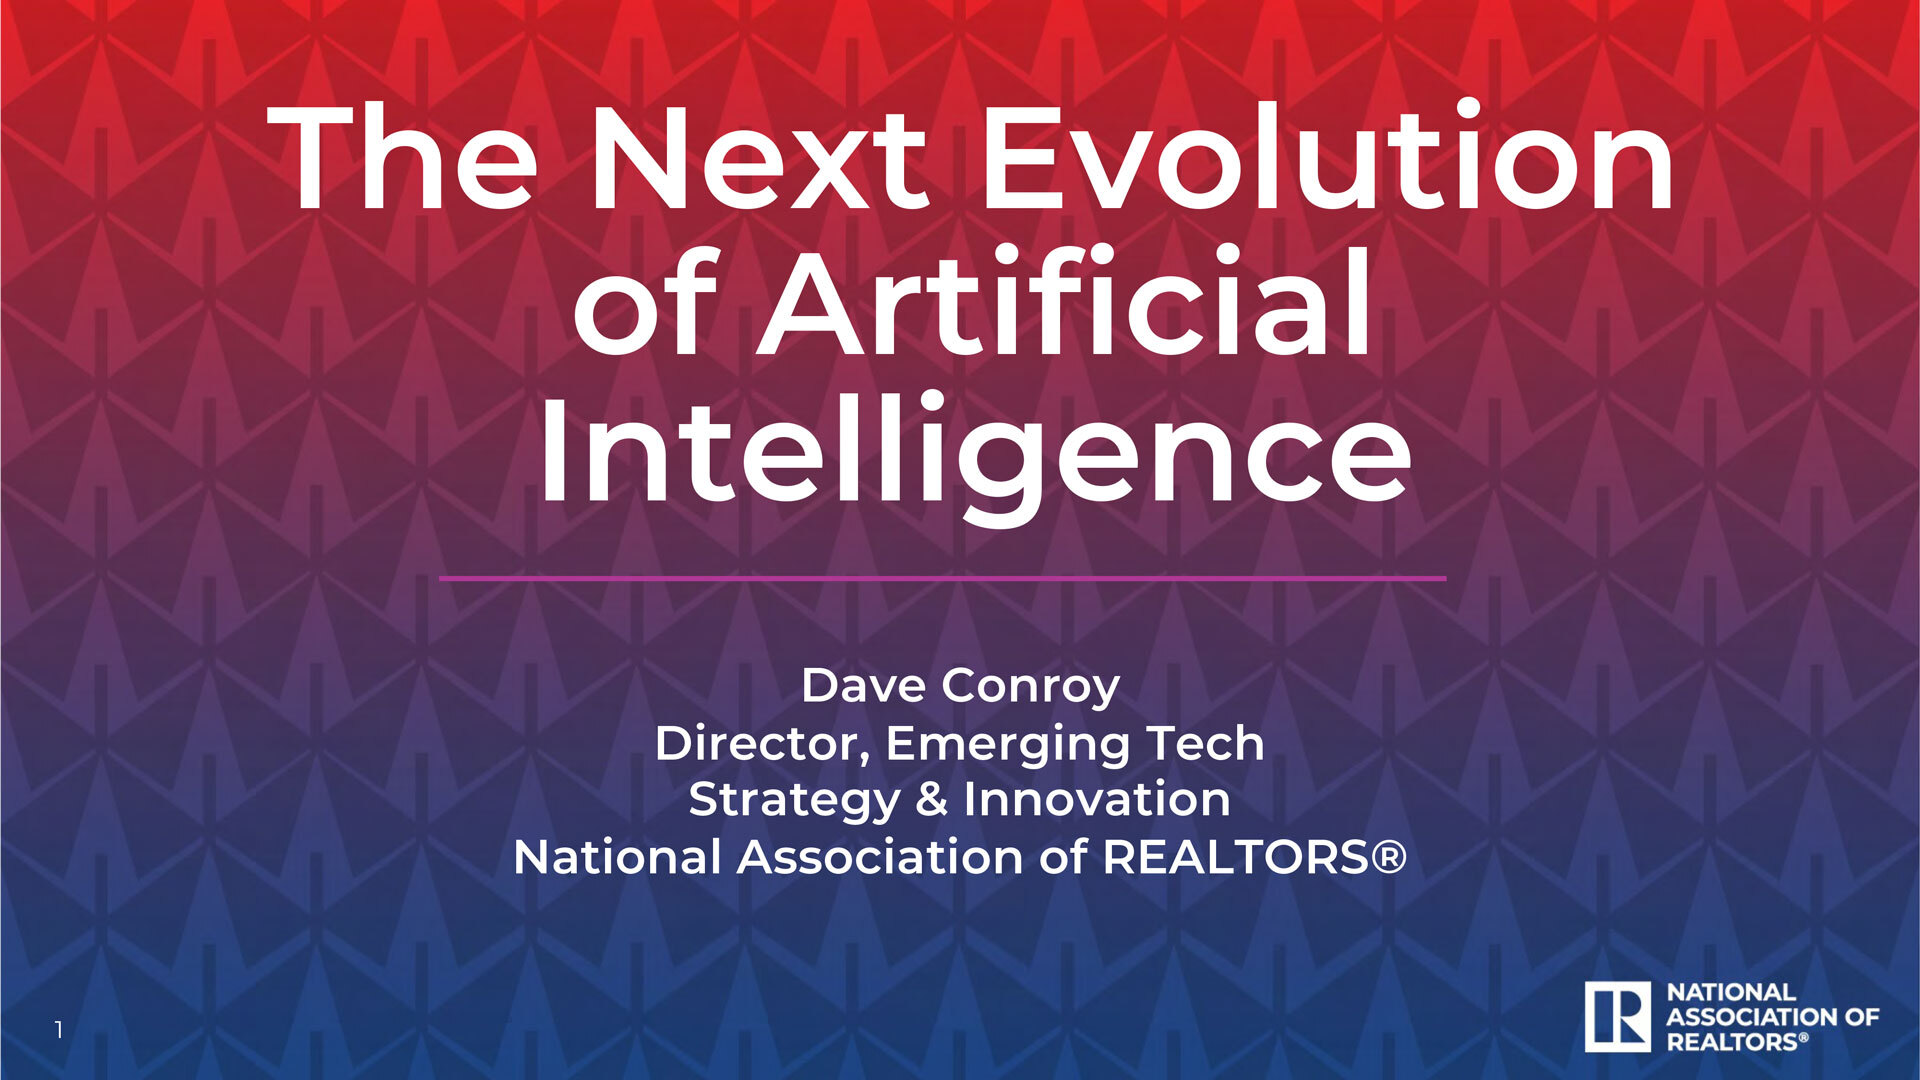 The Next Evolution of Artificial Intelligence. Dave Conroy, NAR Director of Emerging Technology